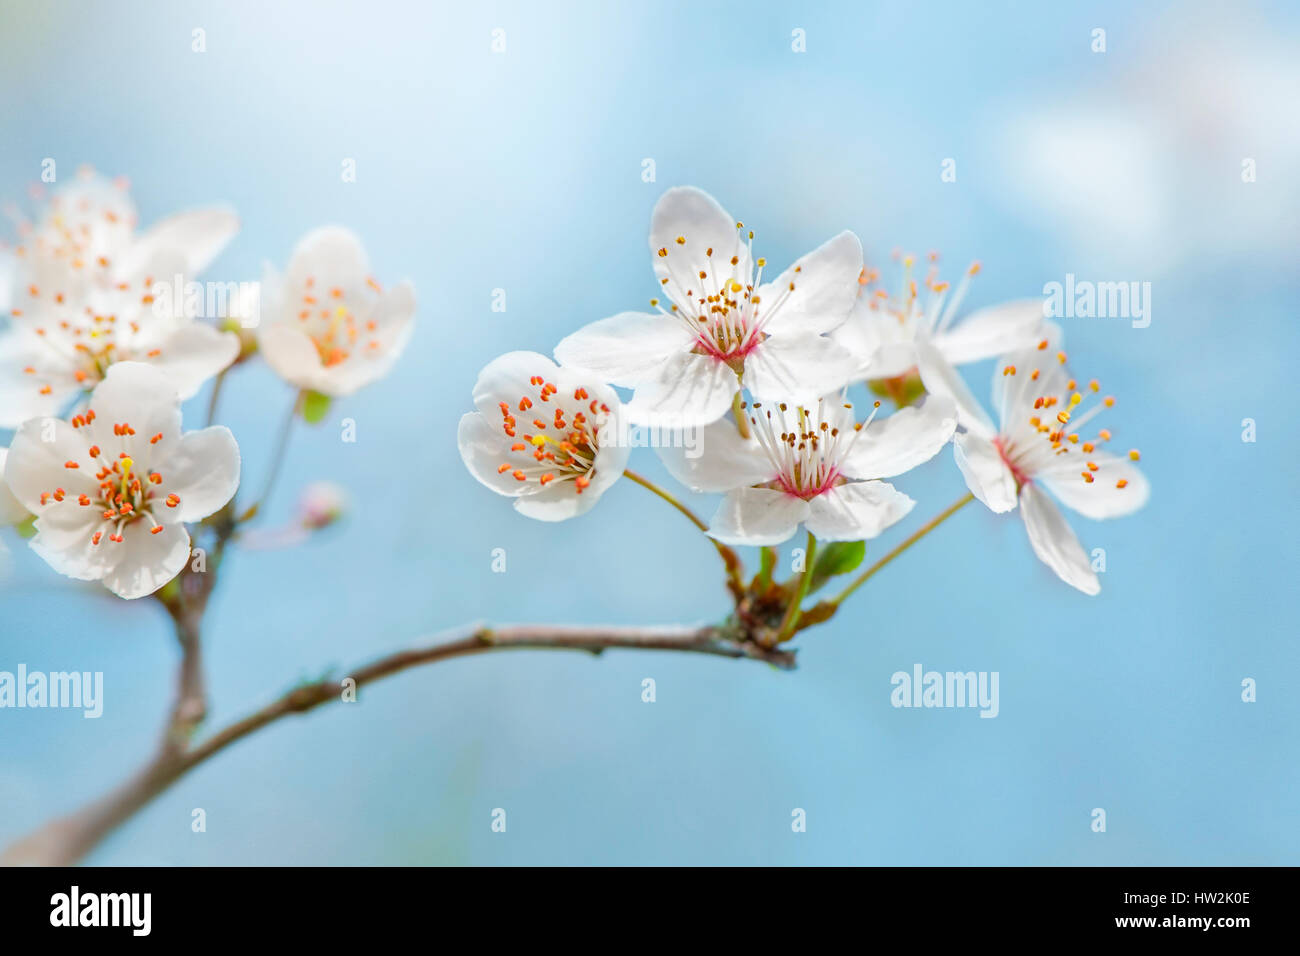 Close-up, high-key image of the delicate white spring flowering, wild cherry blossom - Prunus avium flowers, taken against a blue sky Stock Photo